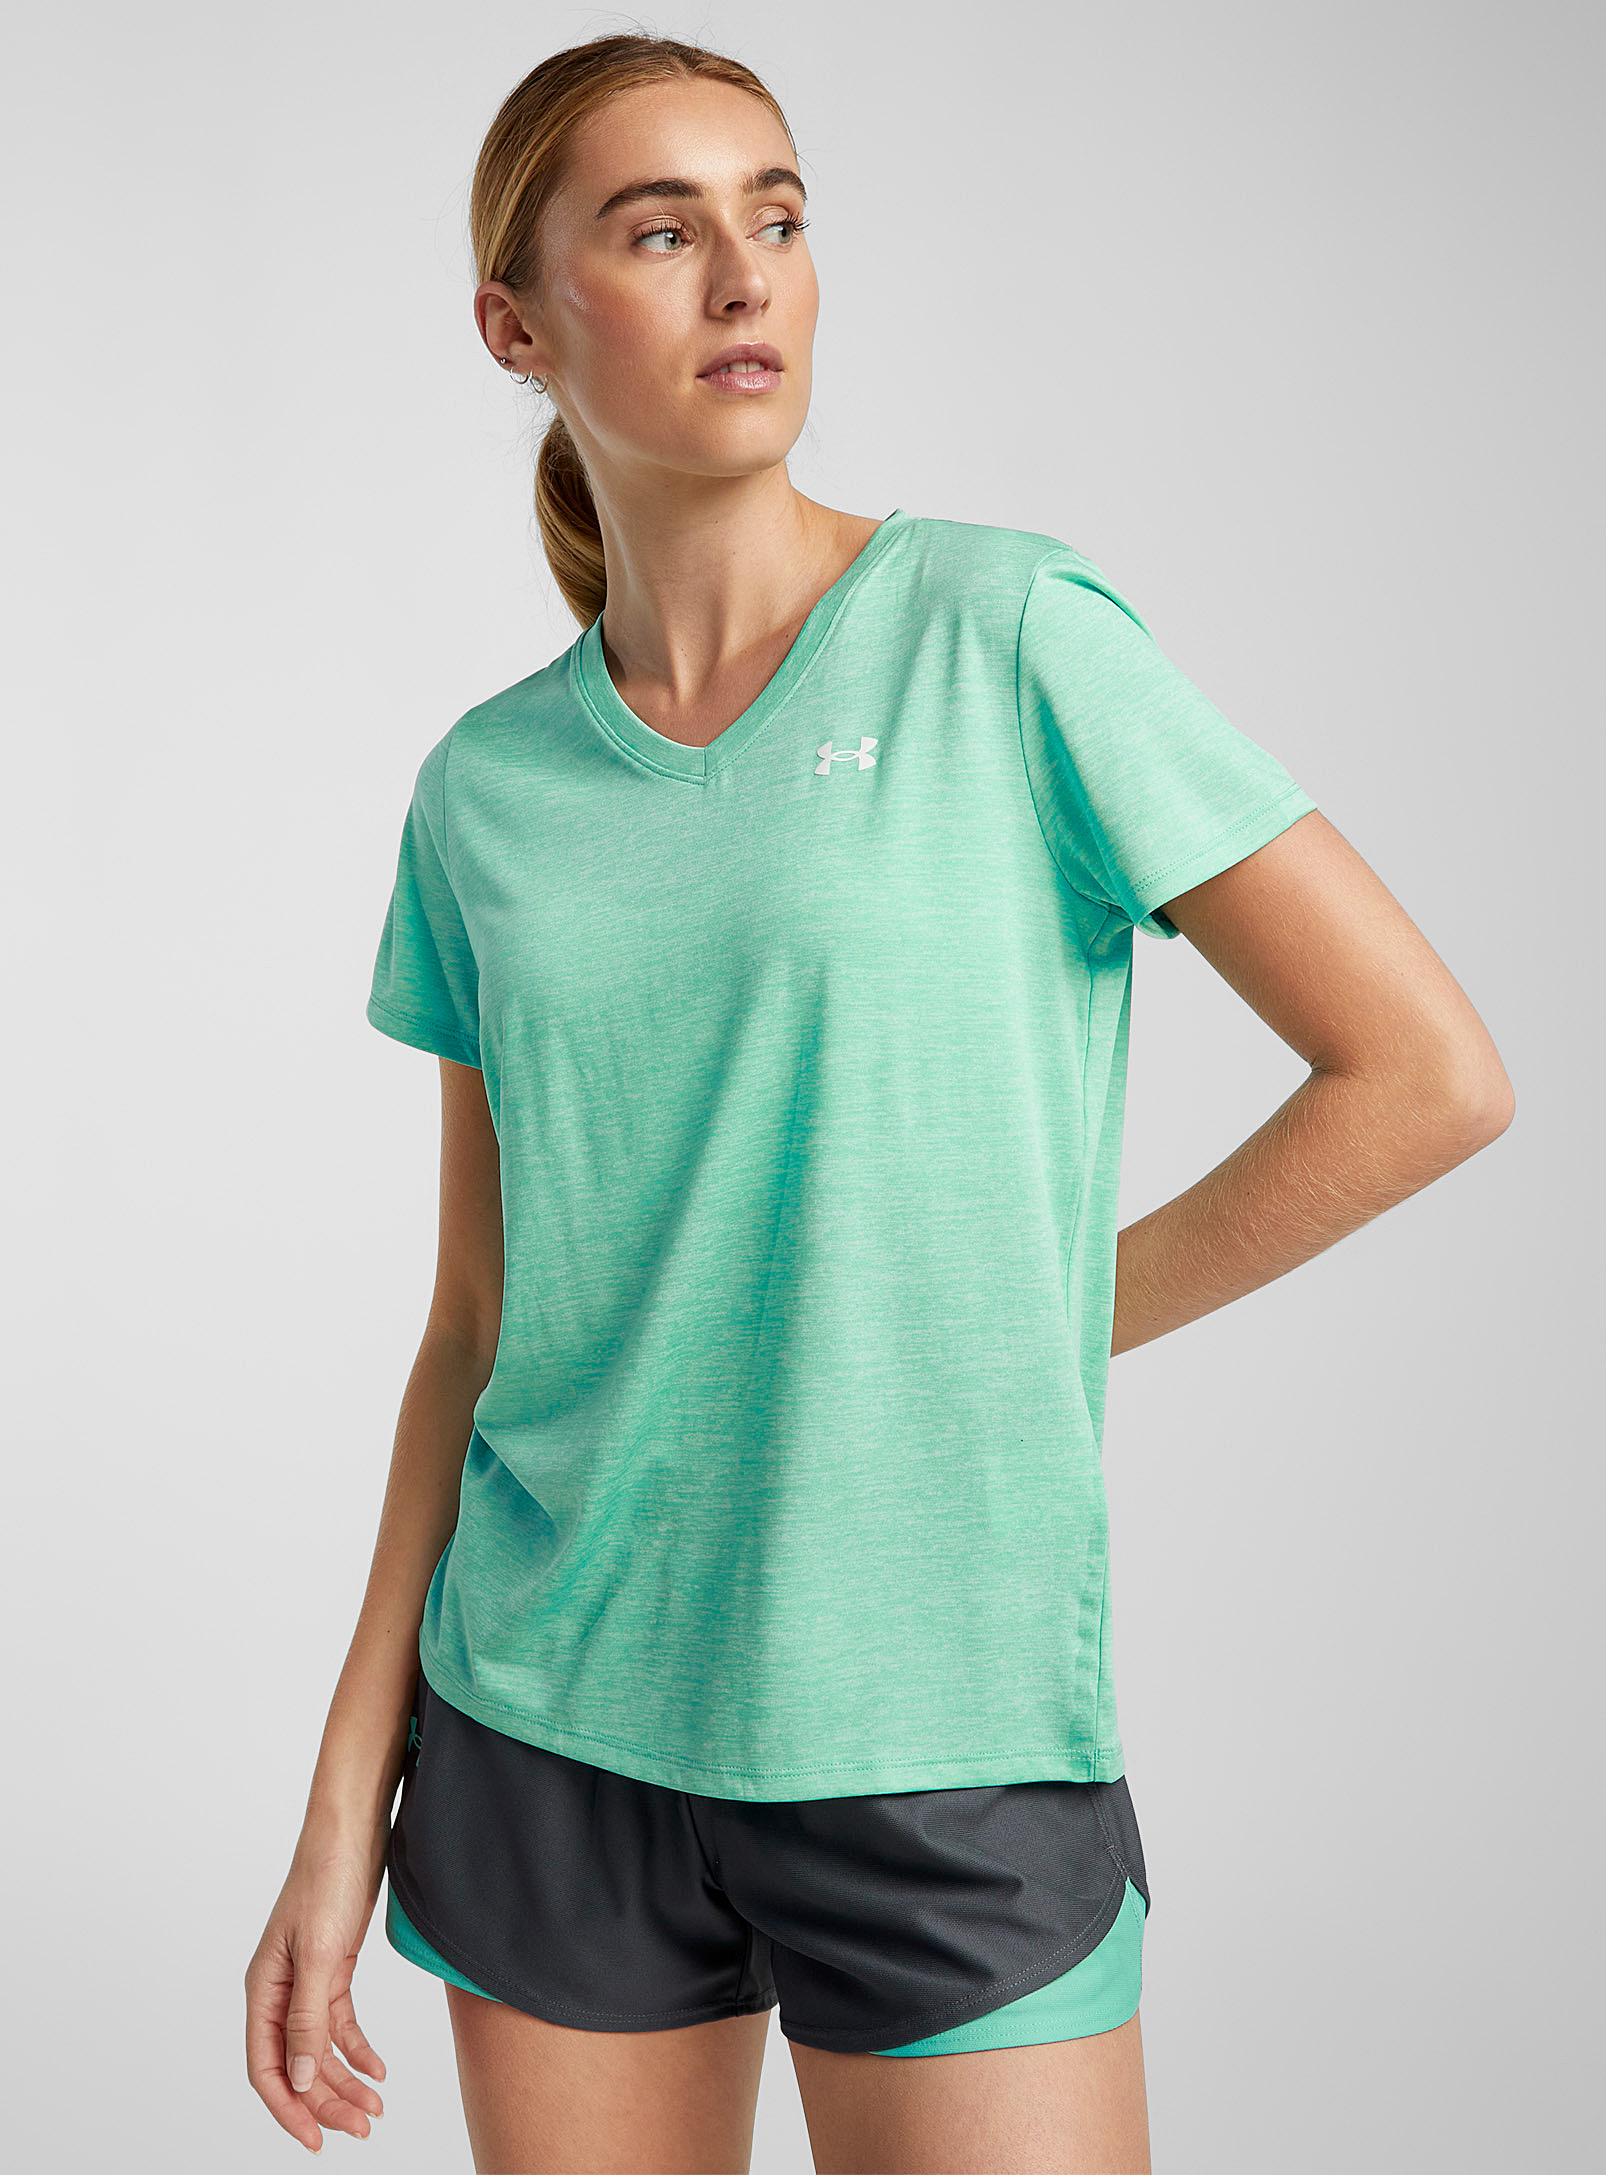 Under Armour Twist Heathered V-neck T-shirt In Teal